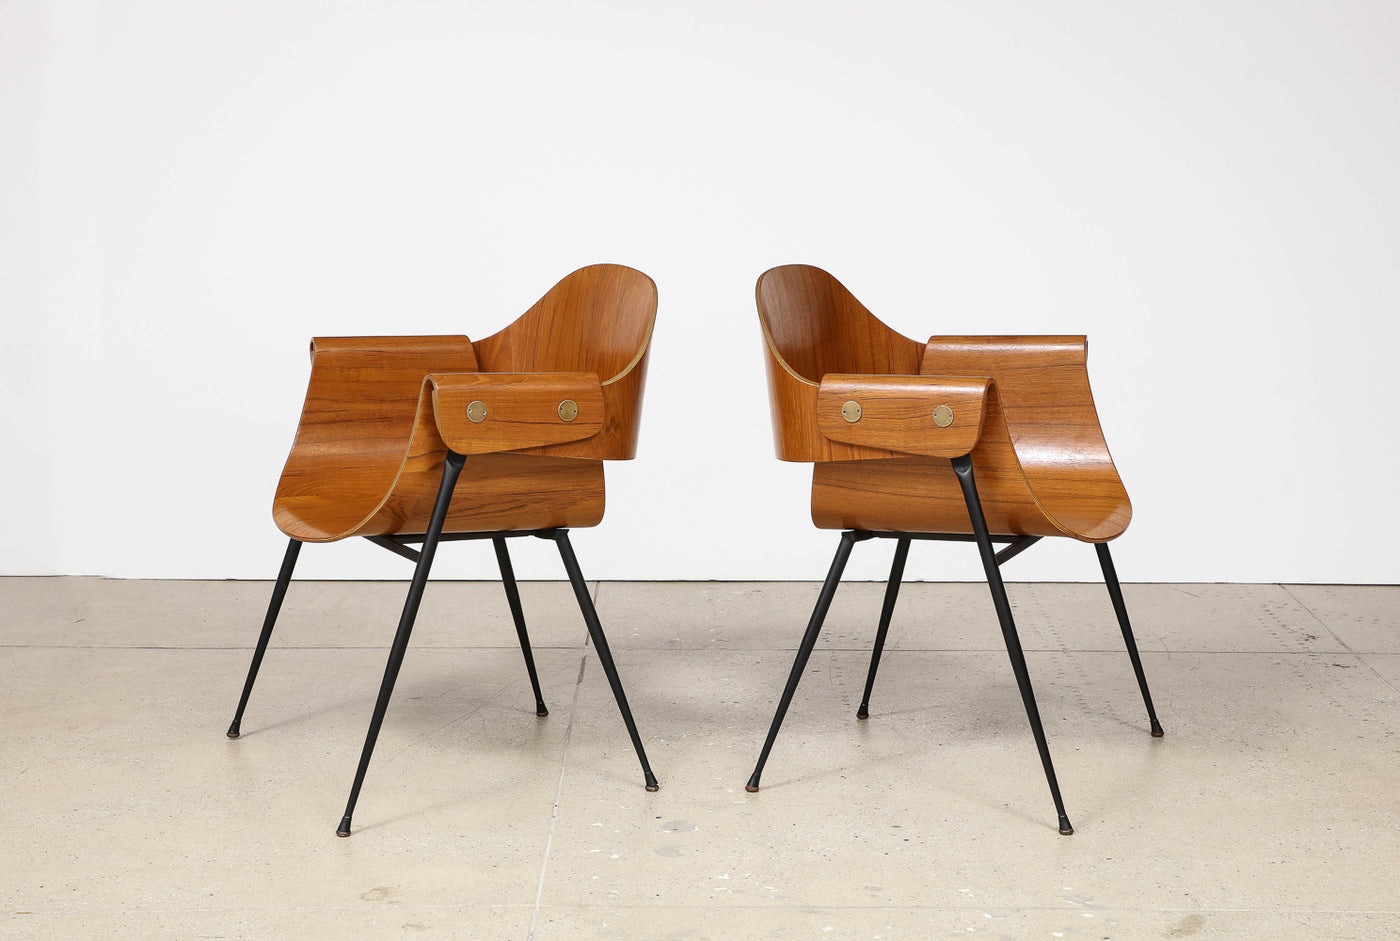 Bentwood Armchairs by Carlo Ratti